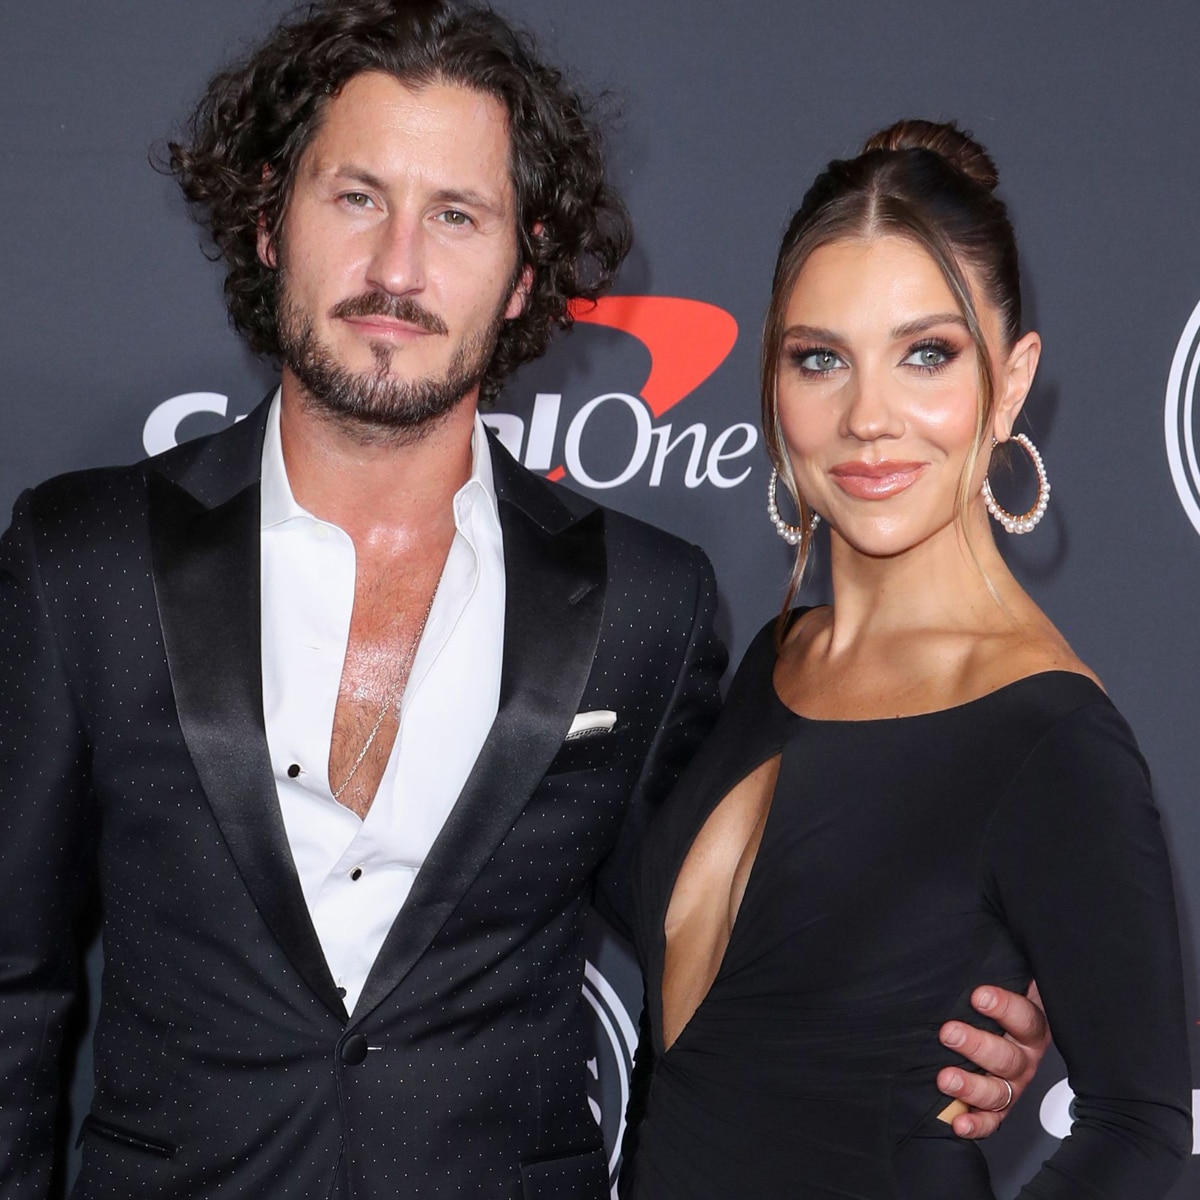 Jenna Johnson and Val Chmerkovskiy's ESPYS Date Night Is a Perfect 10